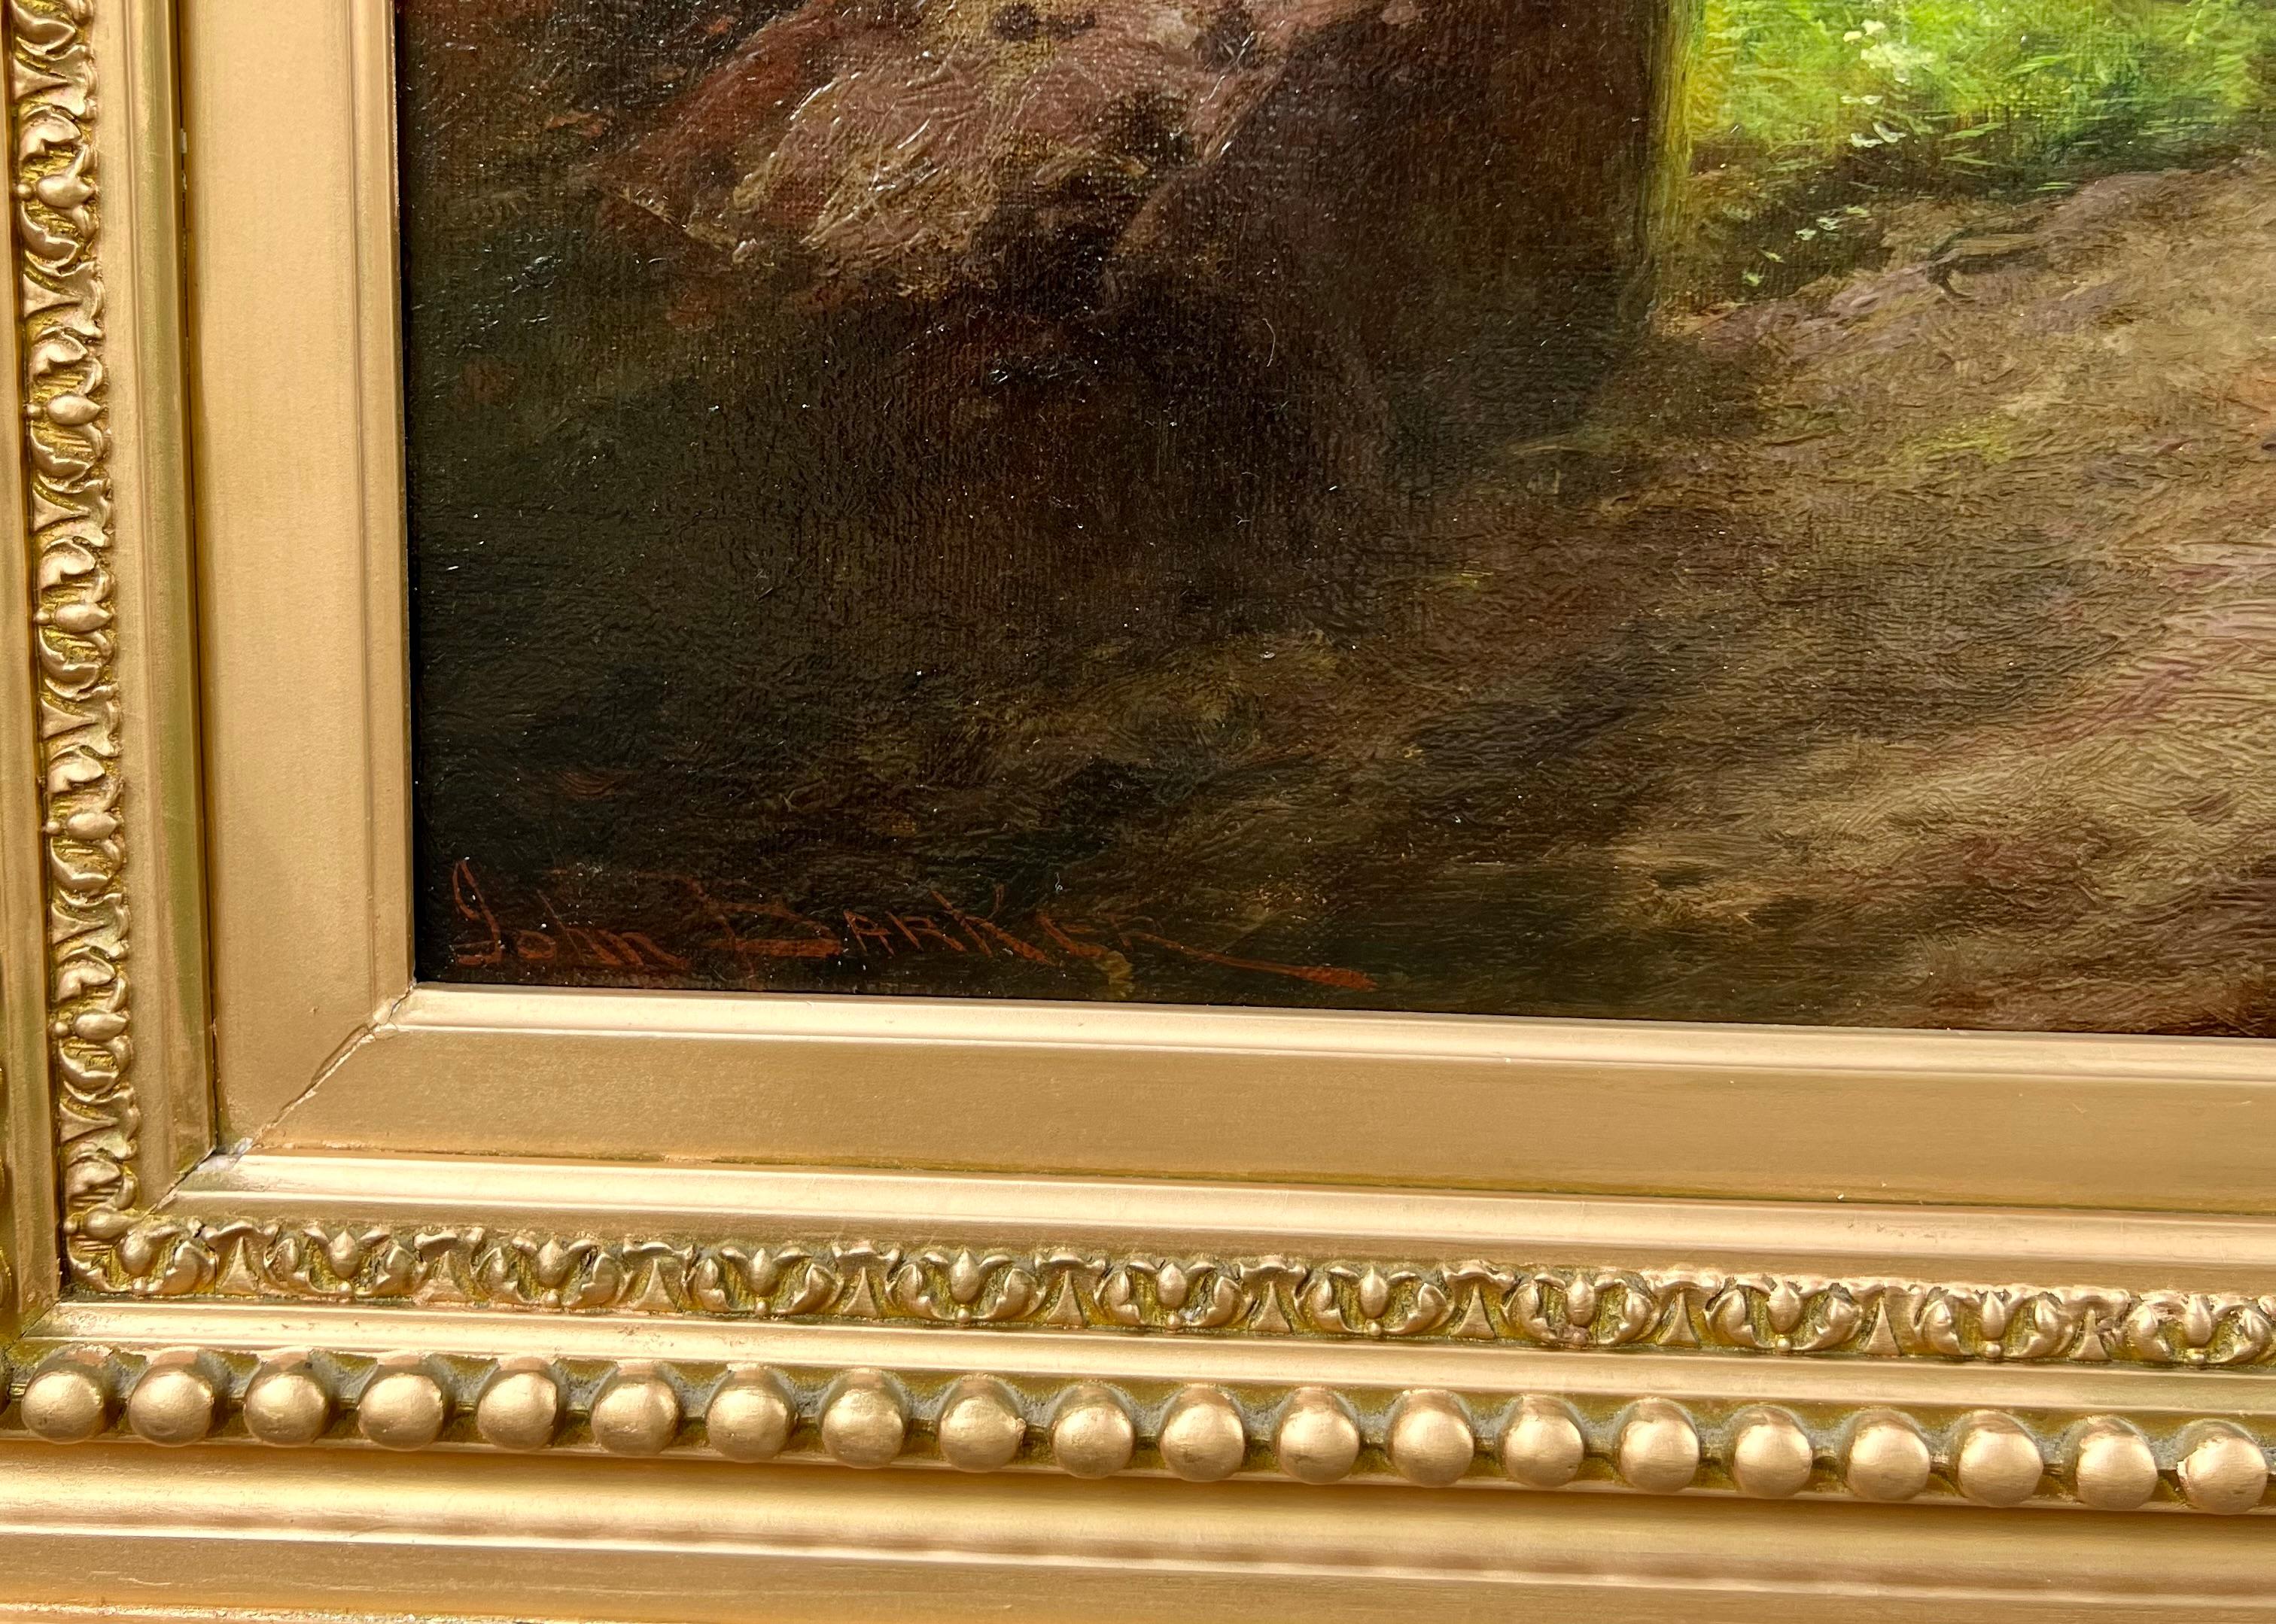 Oil on canvas, signed lower left. Measures 32.25